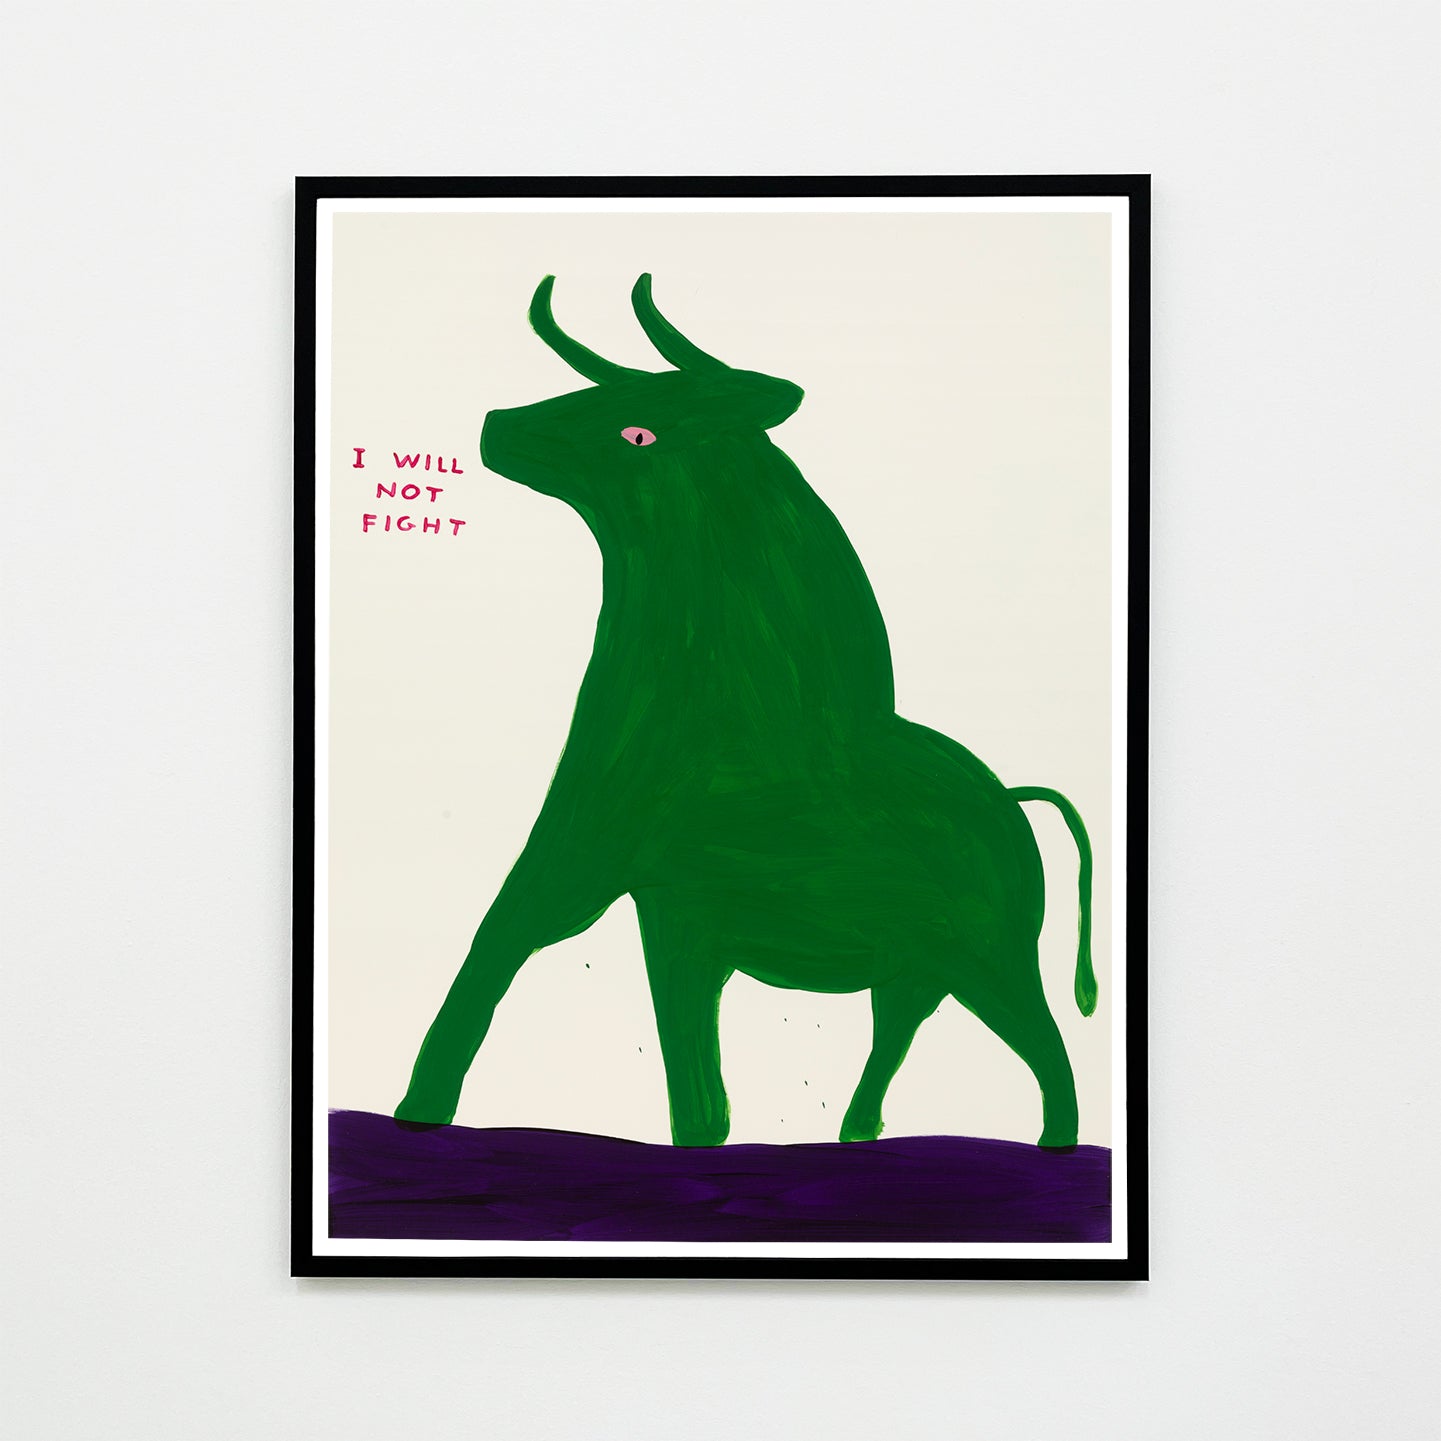 photo of a framed david shrigley art print featuring a deep green bull in an aggressive stance, with small text next to its mouth stating 'I WILL NOT FIGHT'. this david shrigley print features his signature cartoon-ish style and is on a beige background. the print is framed in a black box frame with a very small border. buy david shrigley prints